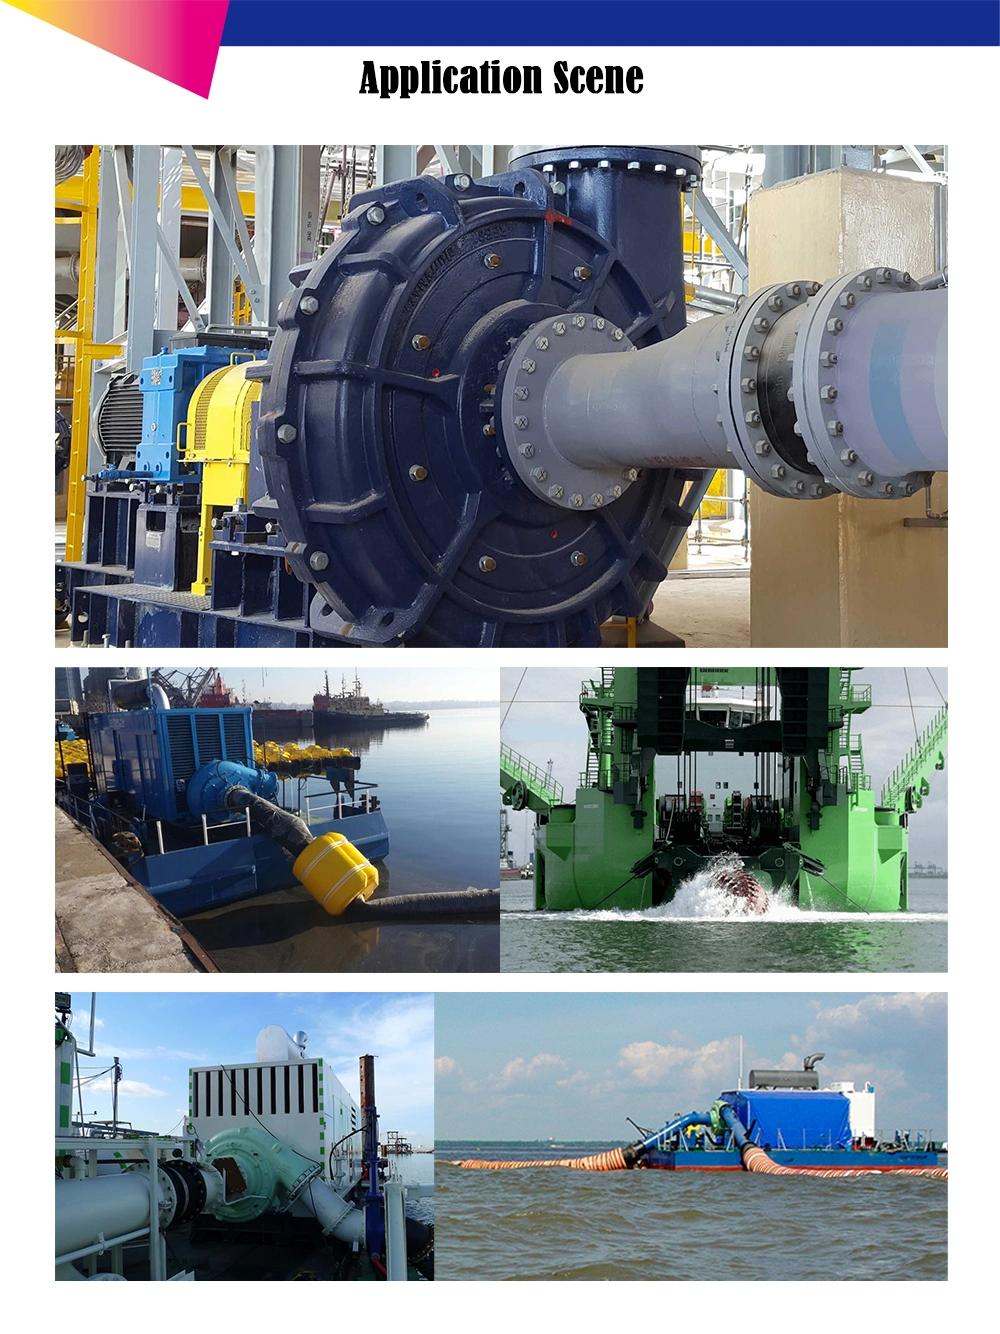 OEM Dredge Equipment Manufacturing Company Submersible Pumps The Latest Technology 8′ Hydraulic or Electric Control CSD Dredge Pumps